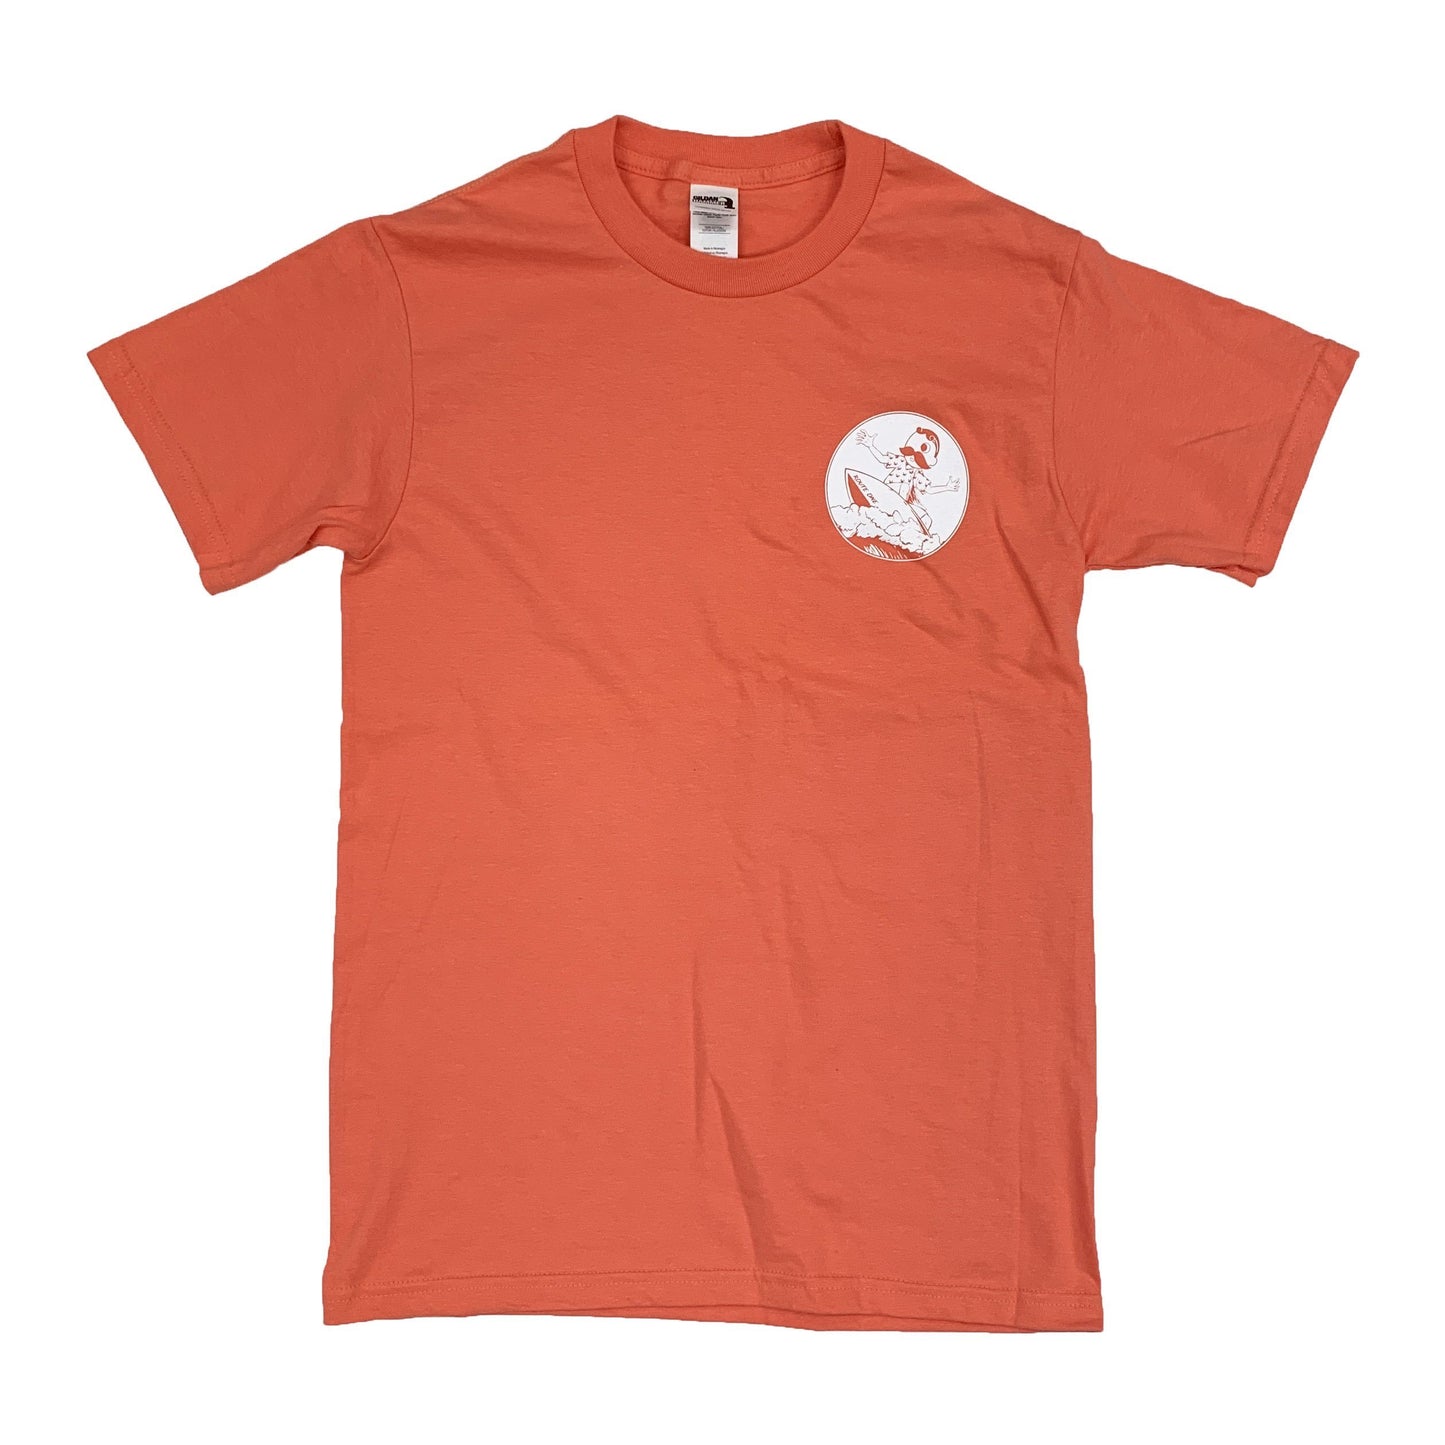 Boh Knows Surfing (Bright Salmon) / Shirt - Route One Apparel